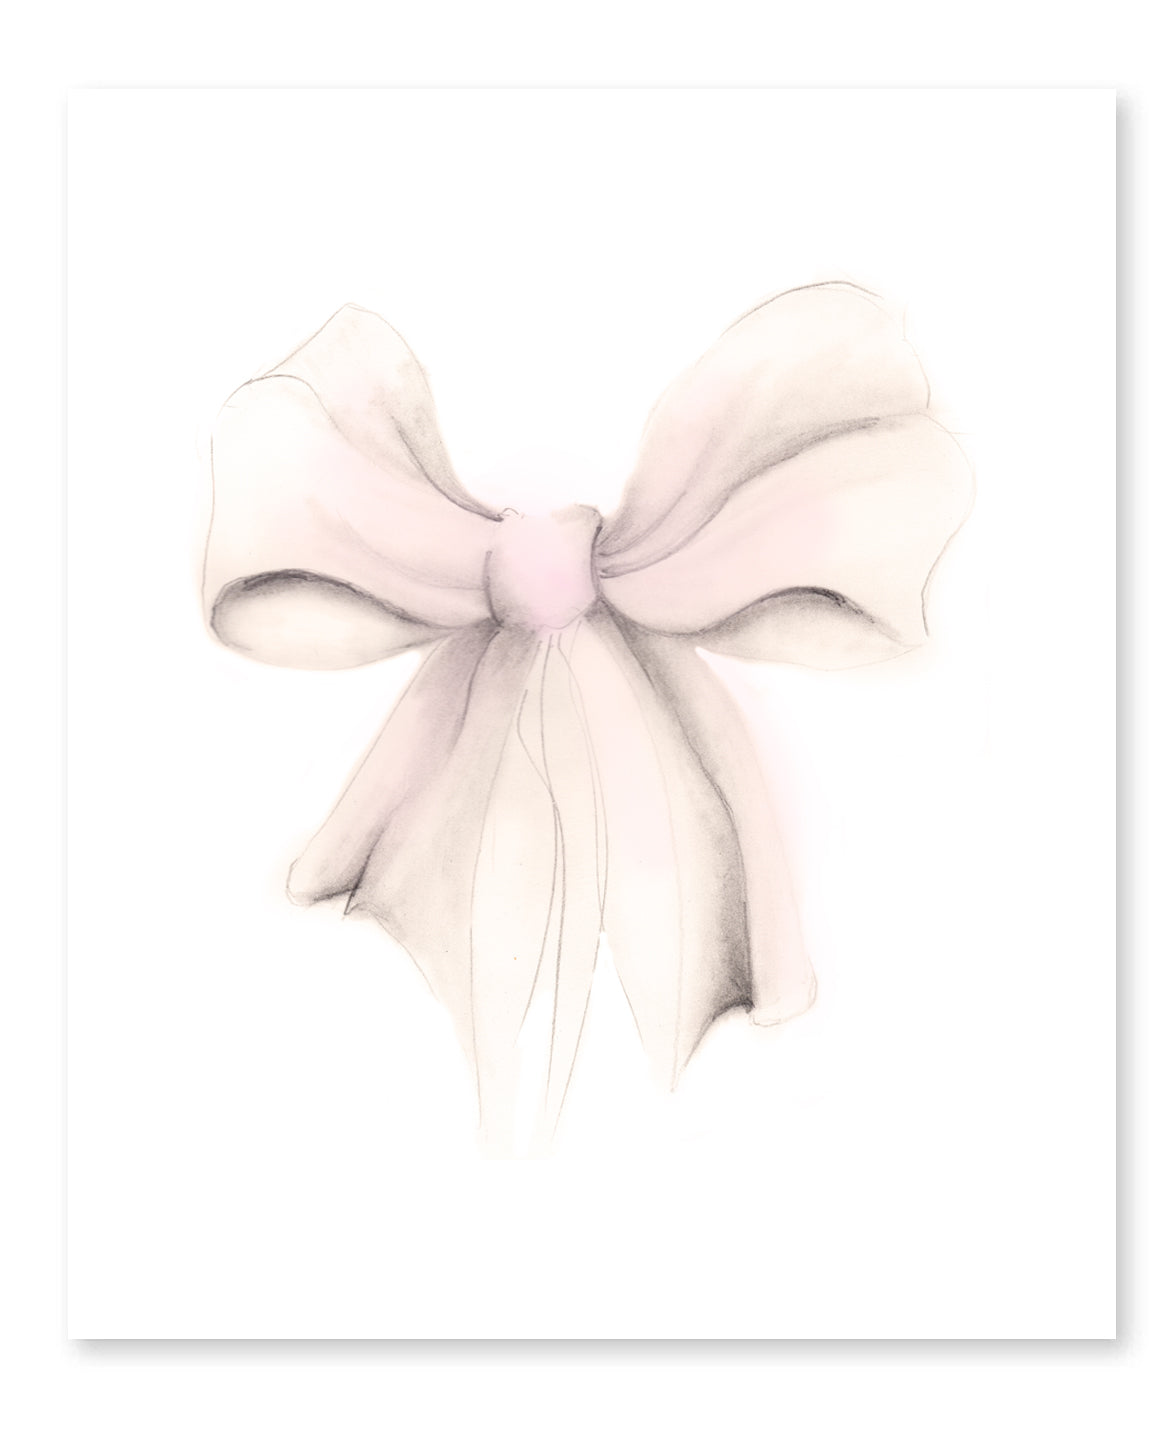 Sketch of a bow in tones of pink and sepia beige. The bow is on a plain white background - Studio Q - Art by Nicky Quartermaine Scott